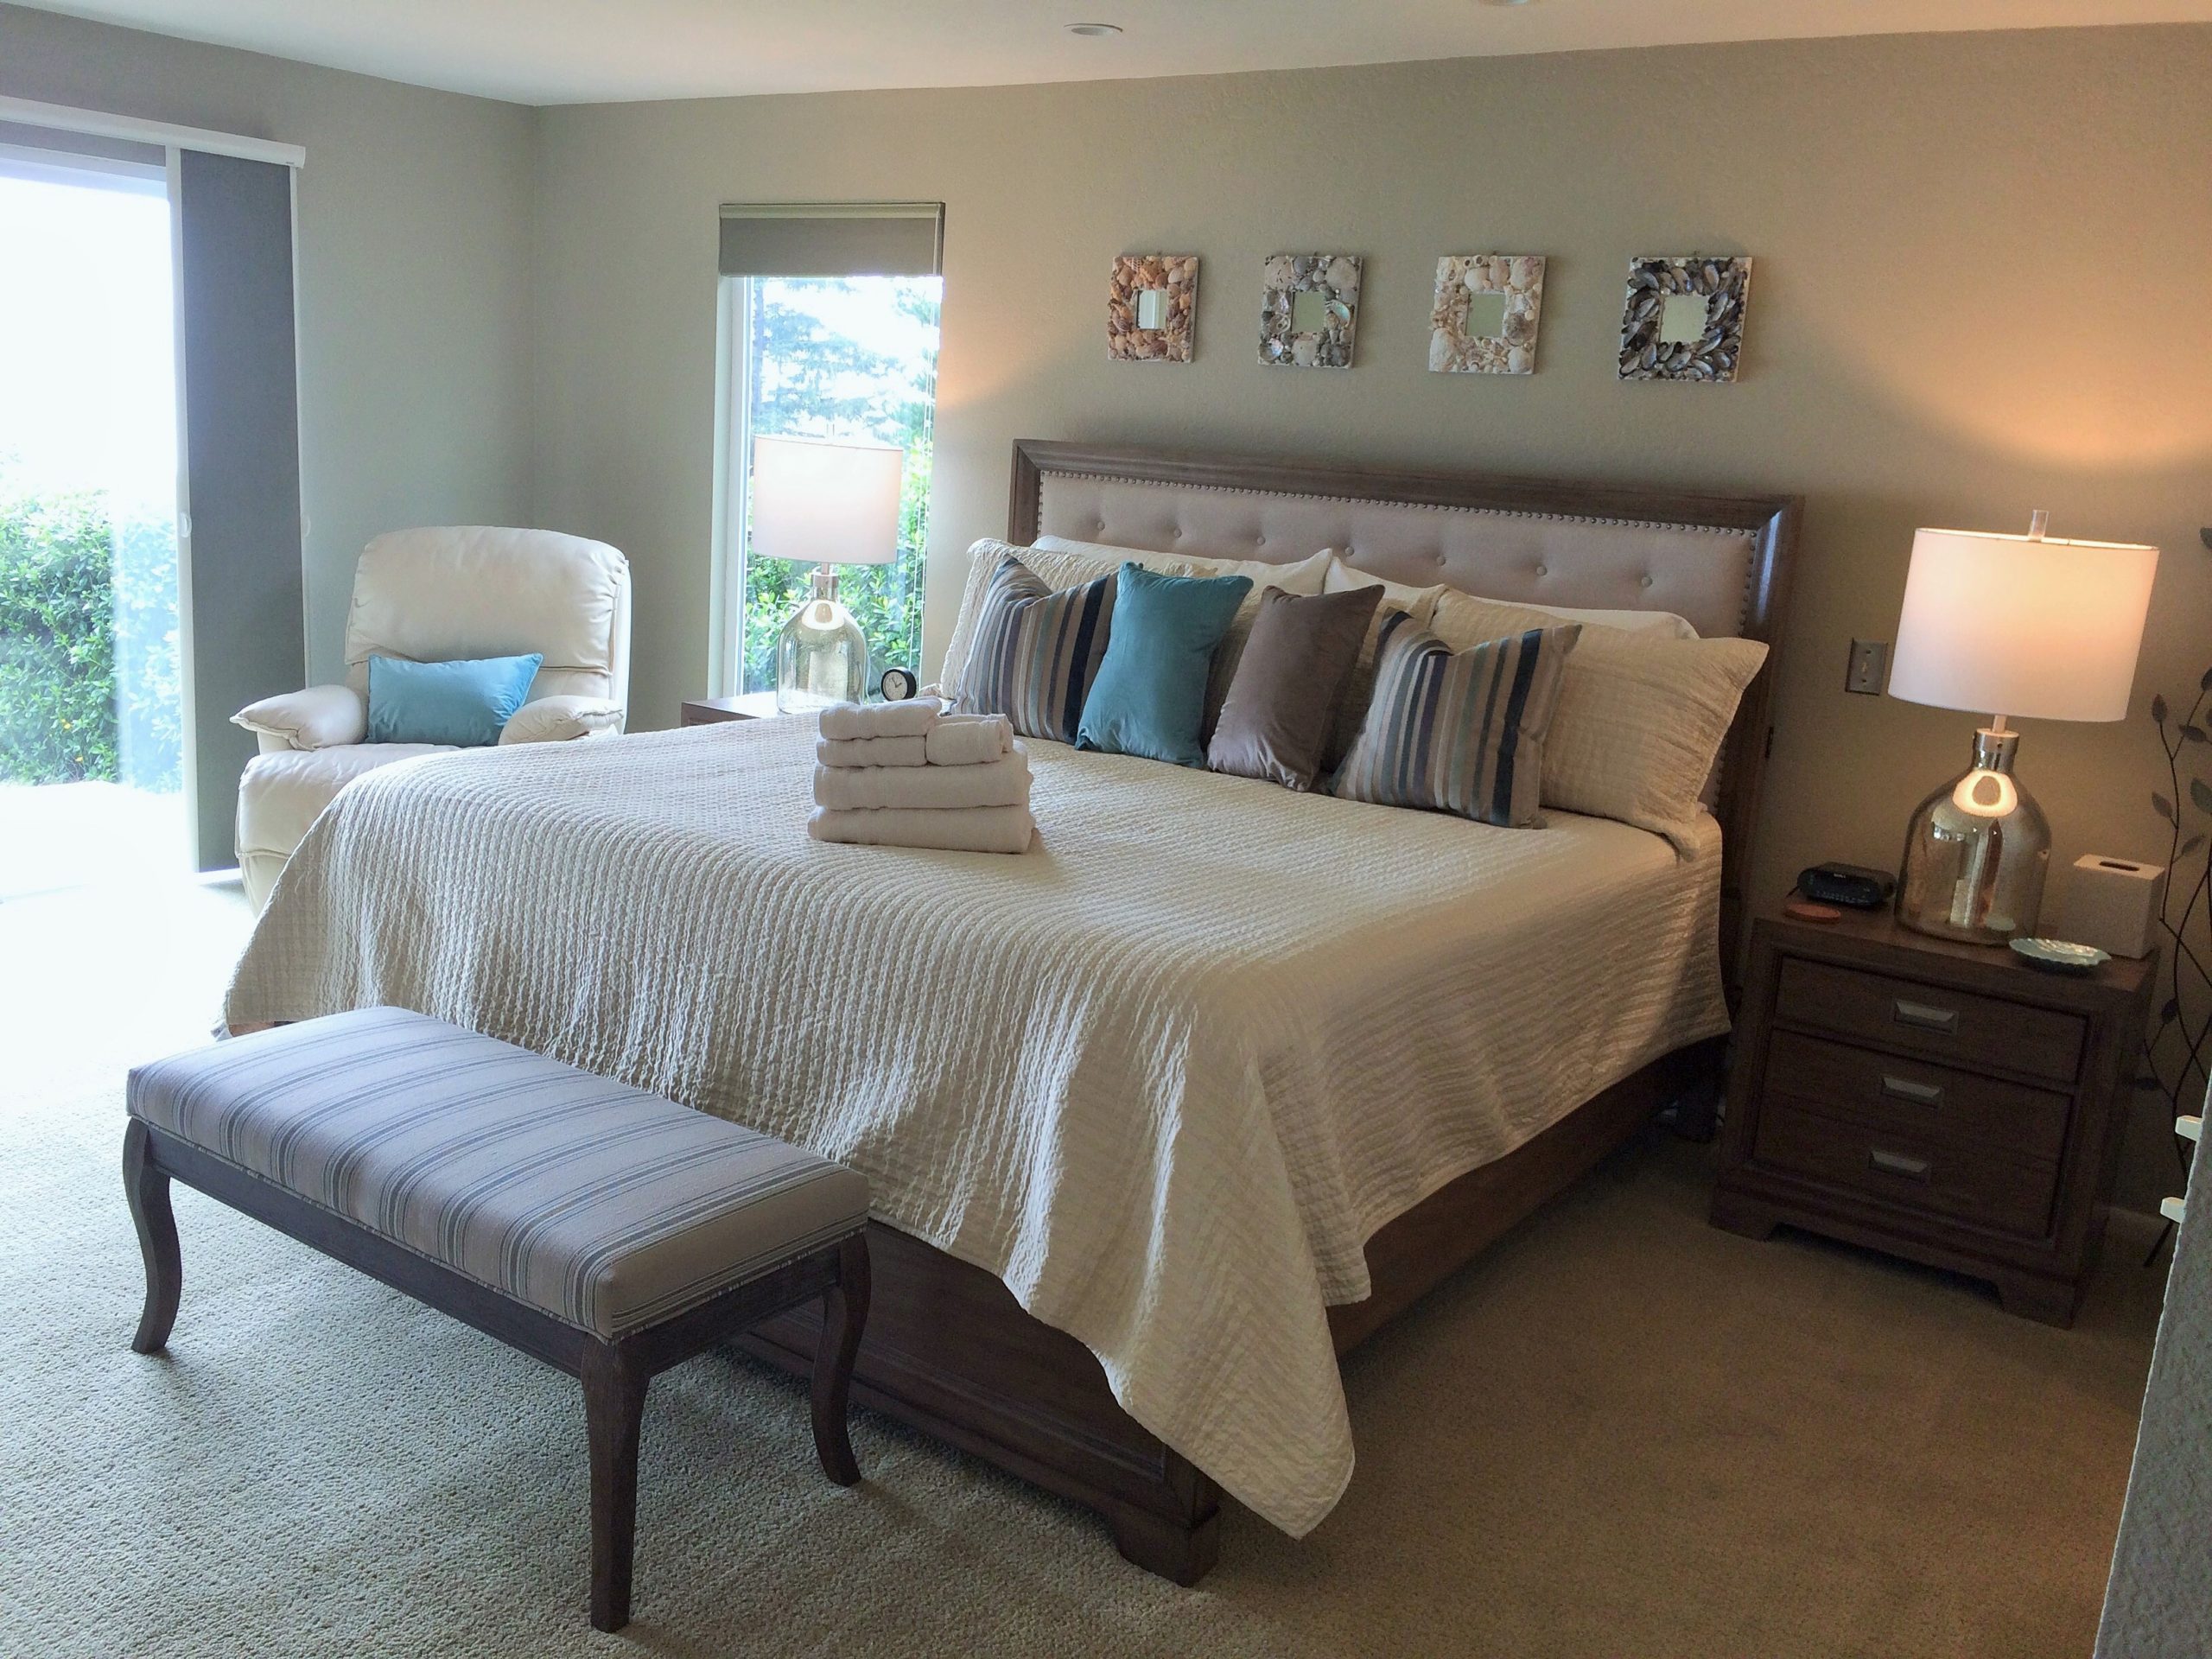 A bedroom at Pacific Edge with multiple windows and upscale furnishings at Pacific Edge